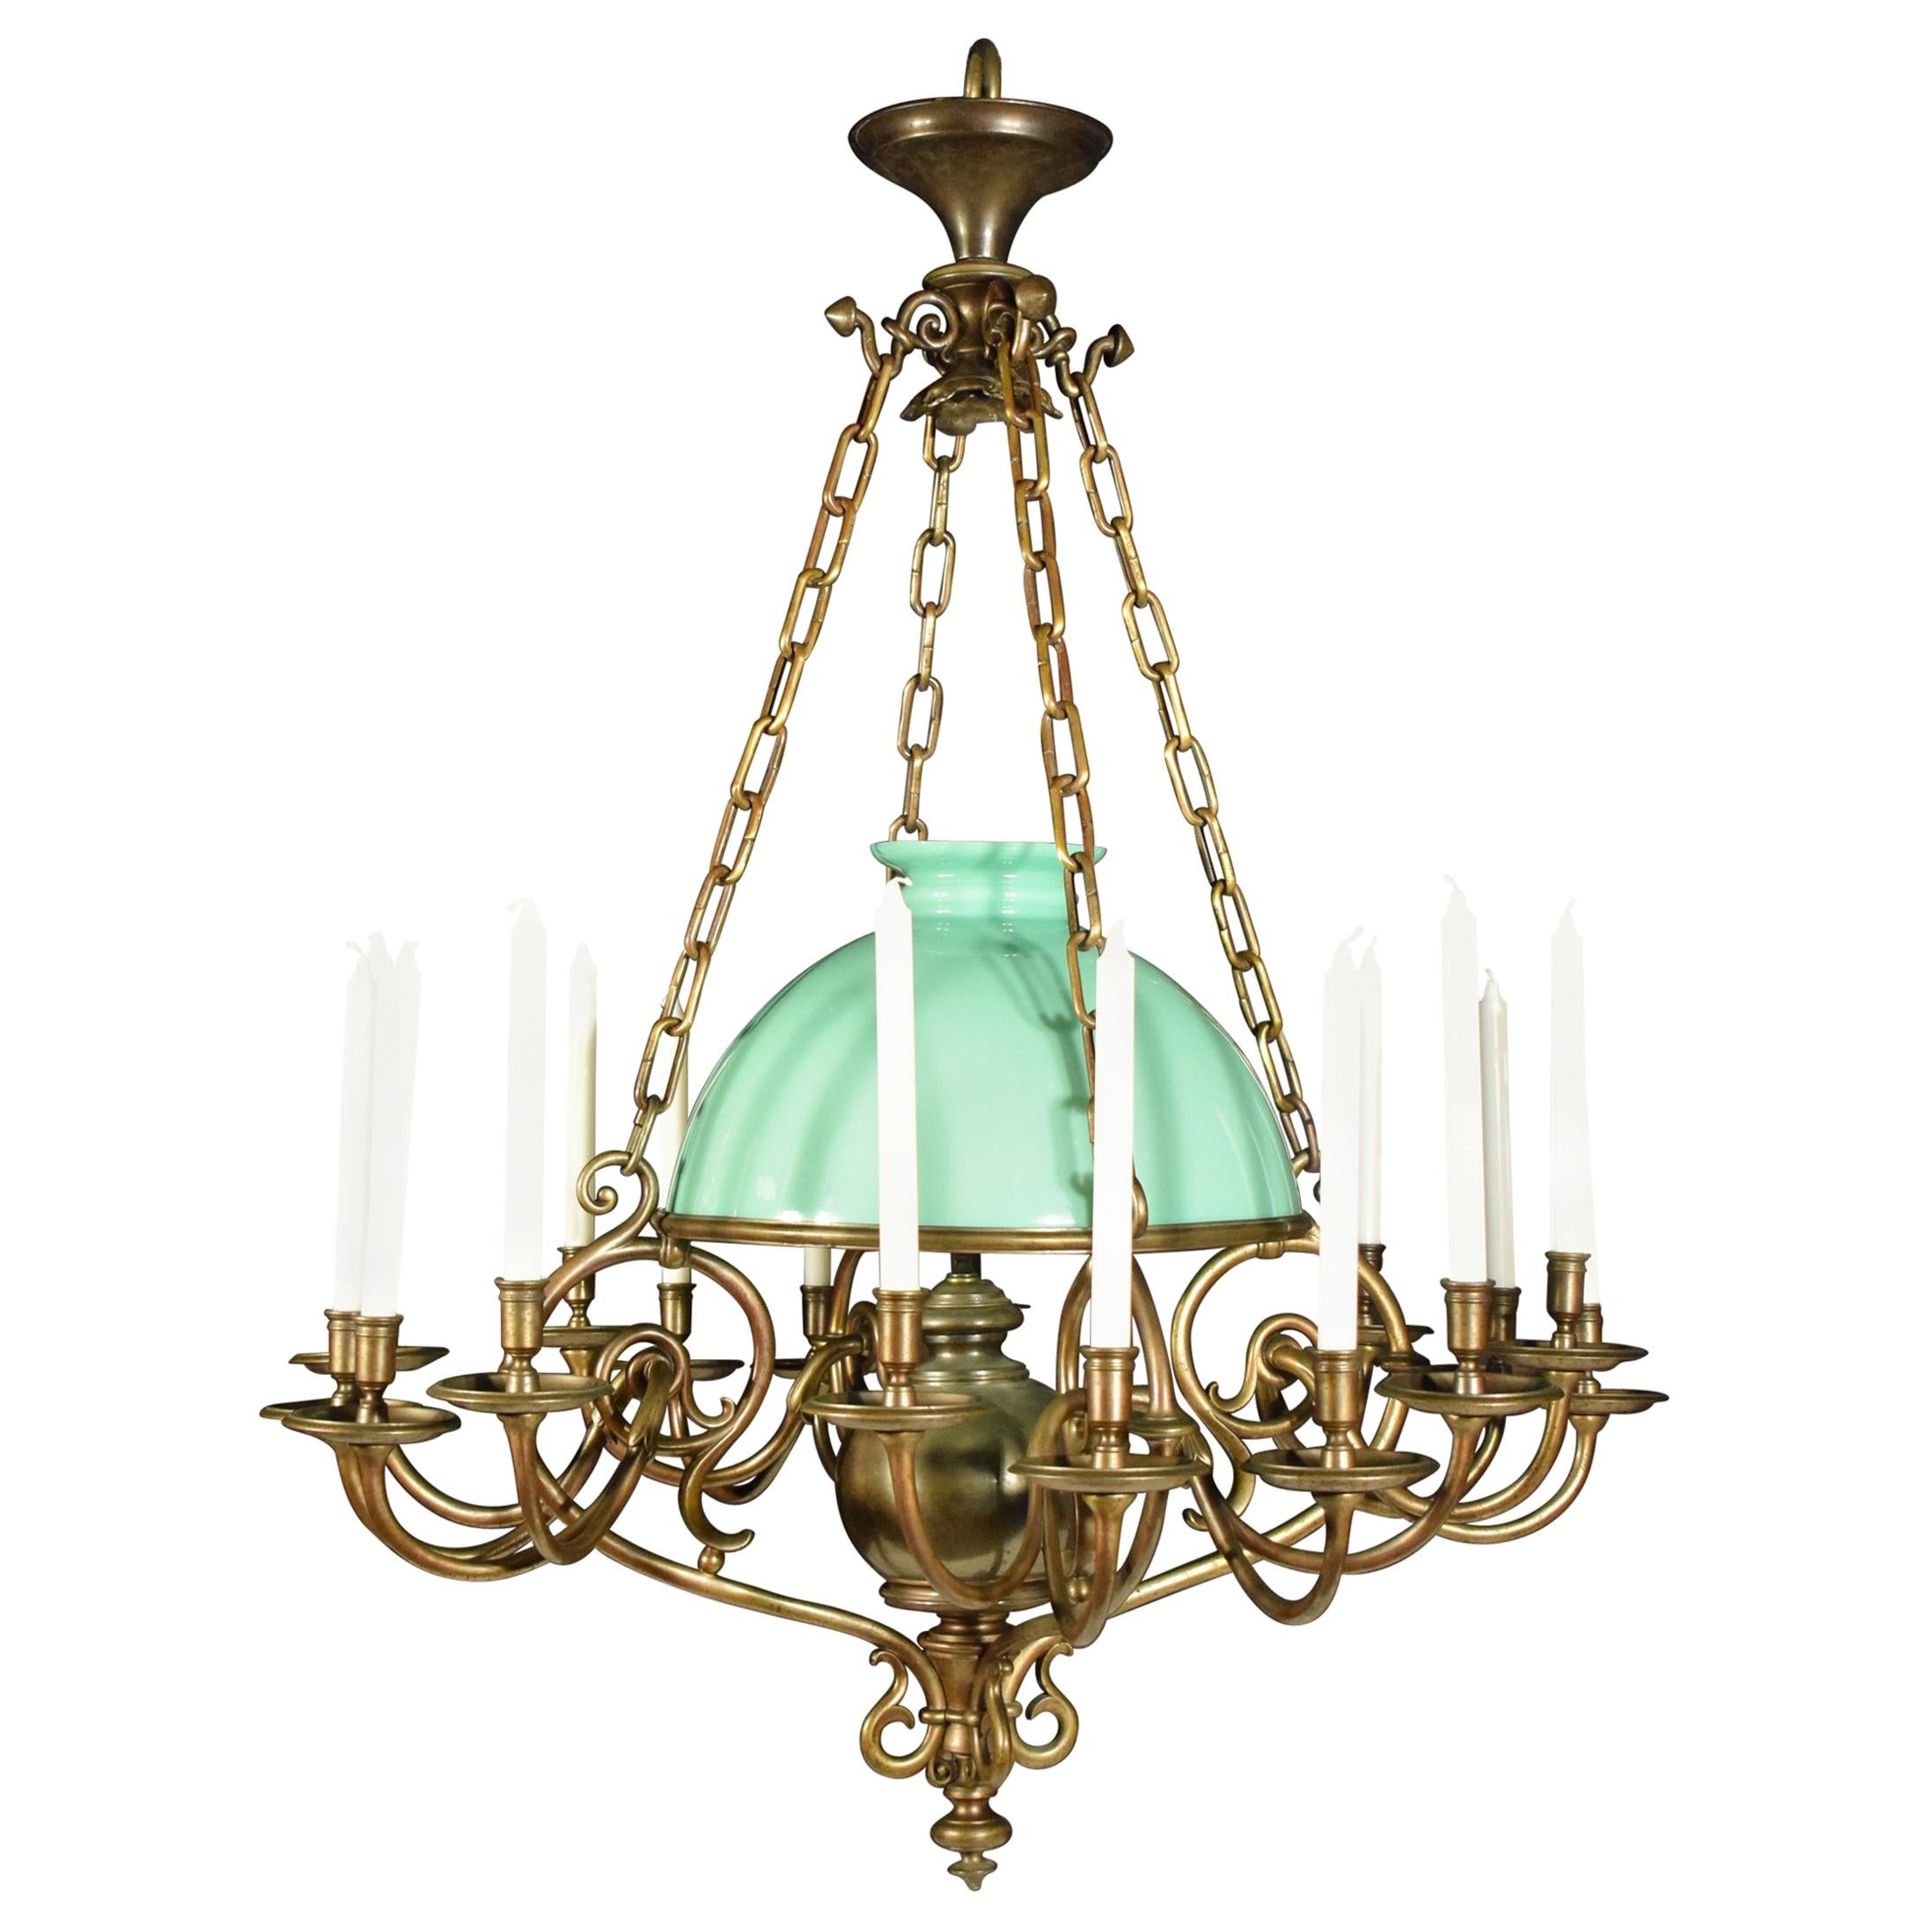 Very Fine Bronze Chandelier with Its Original Pale Green Shade For Sale